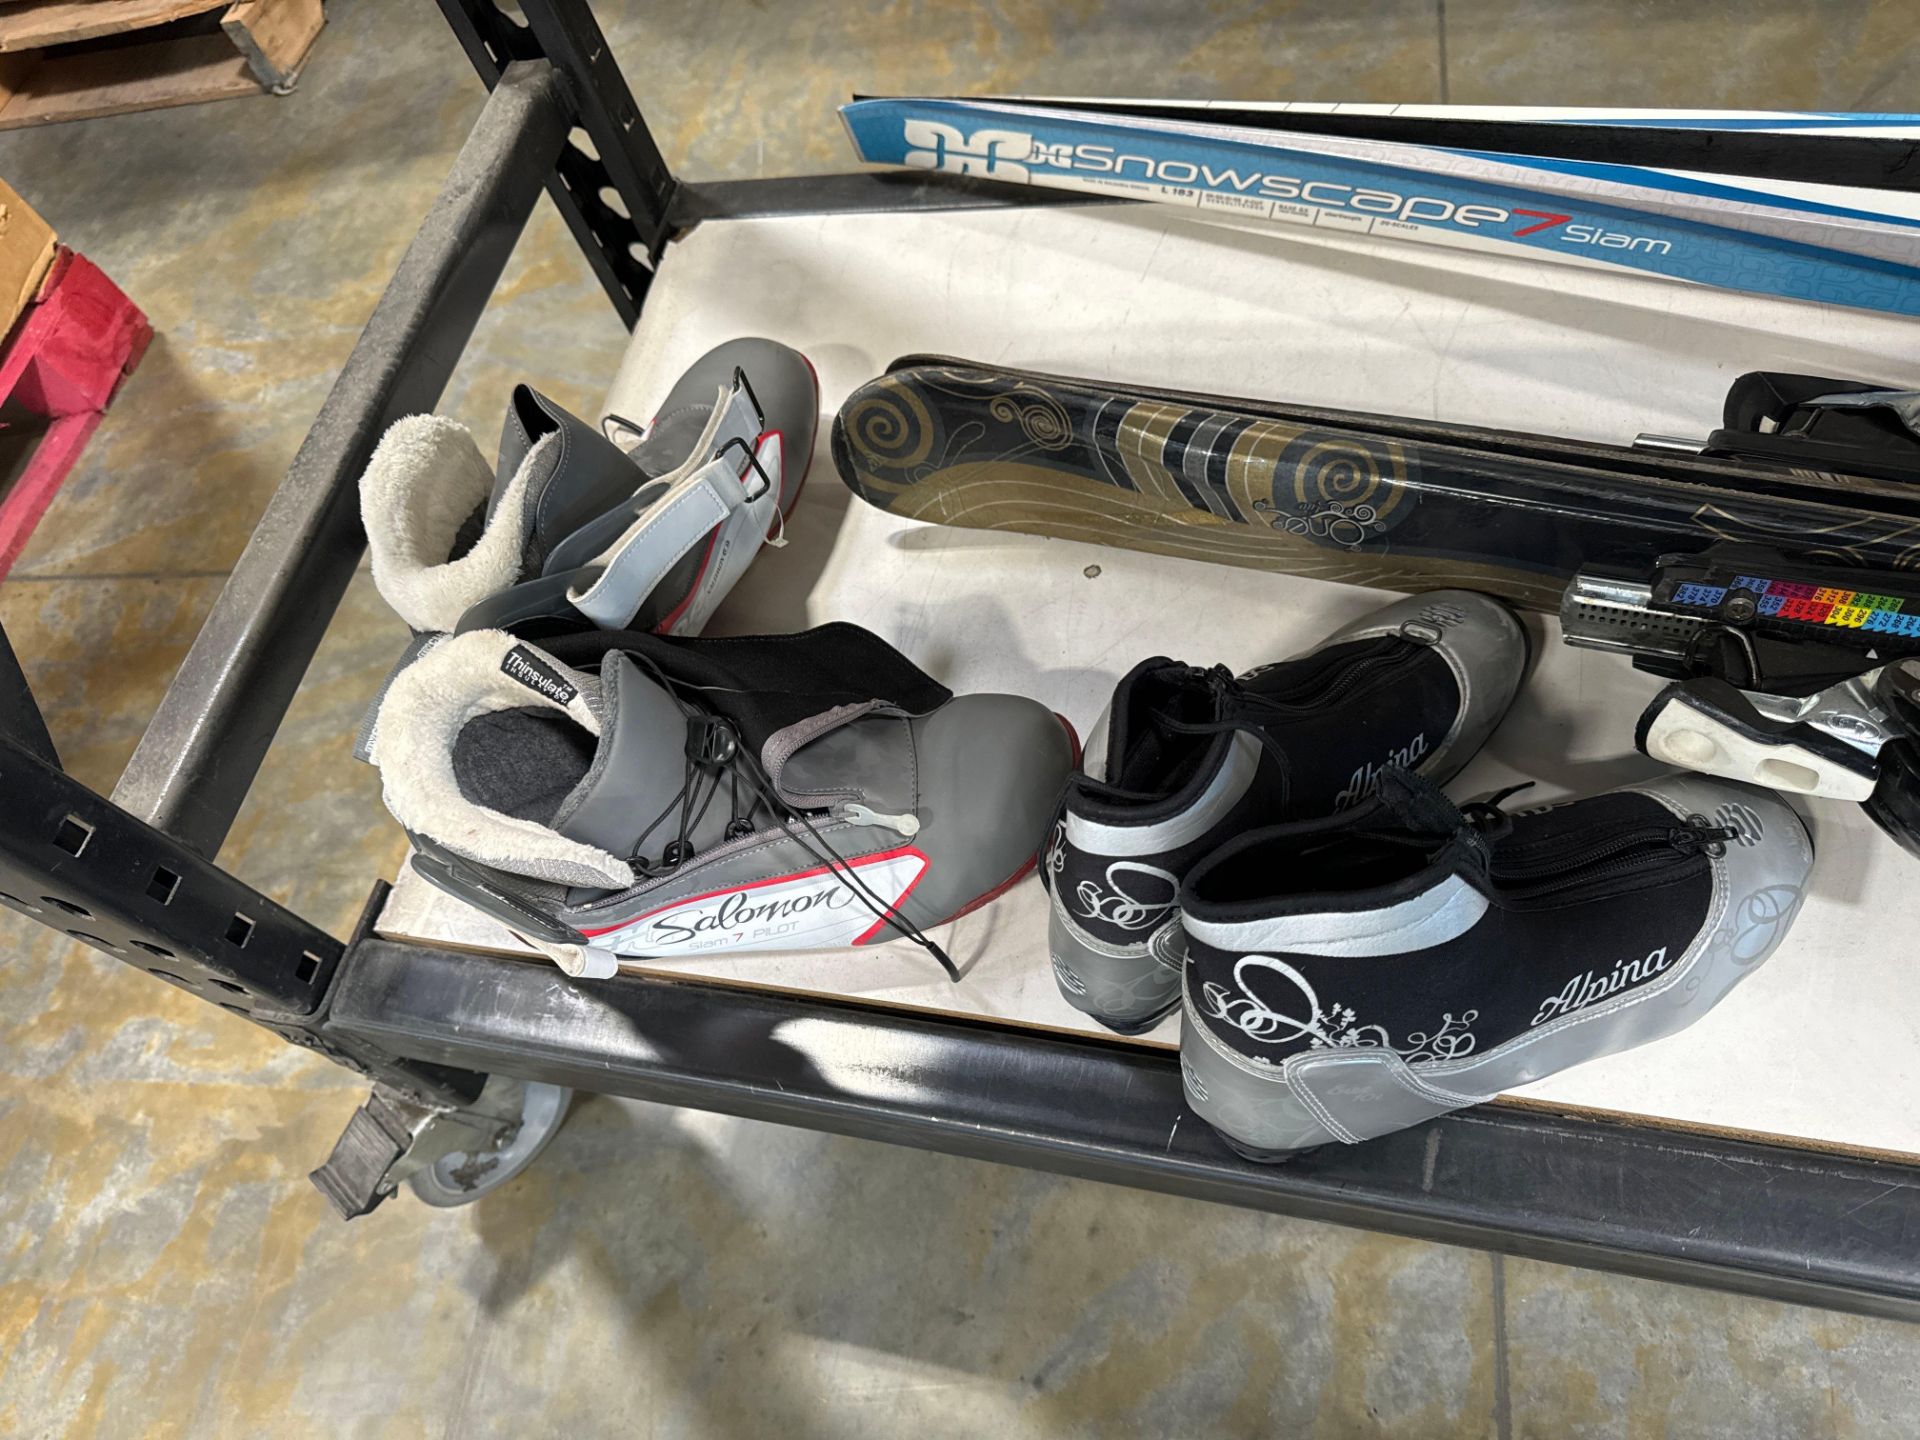 Used Skis, poles, goggles, boots - Image 6 of 6